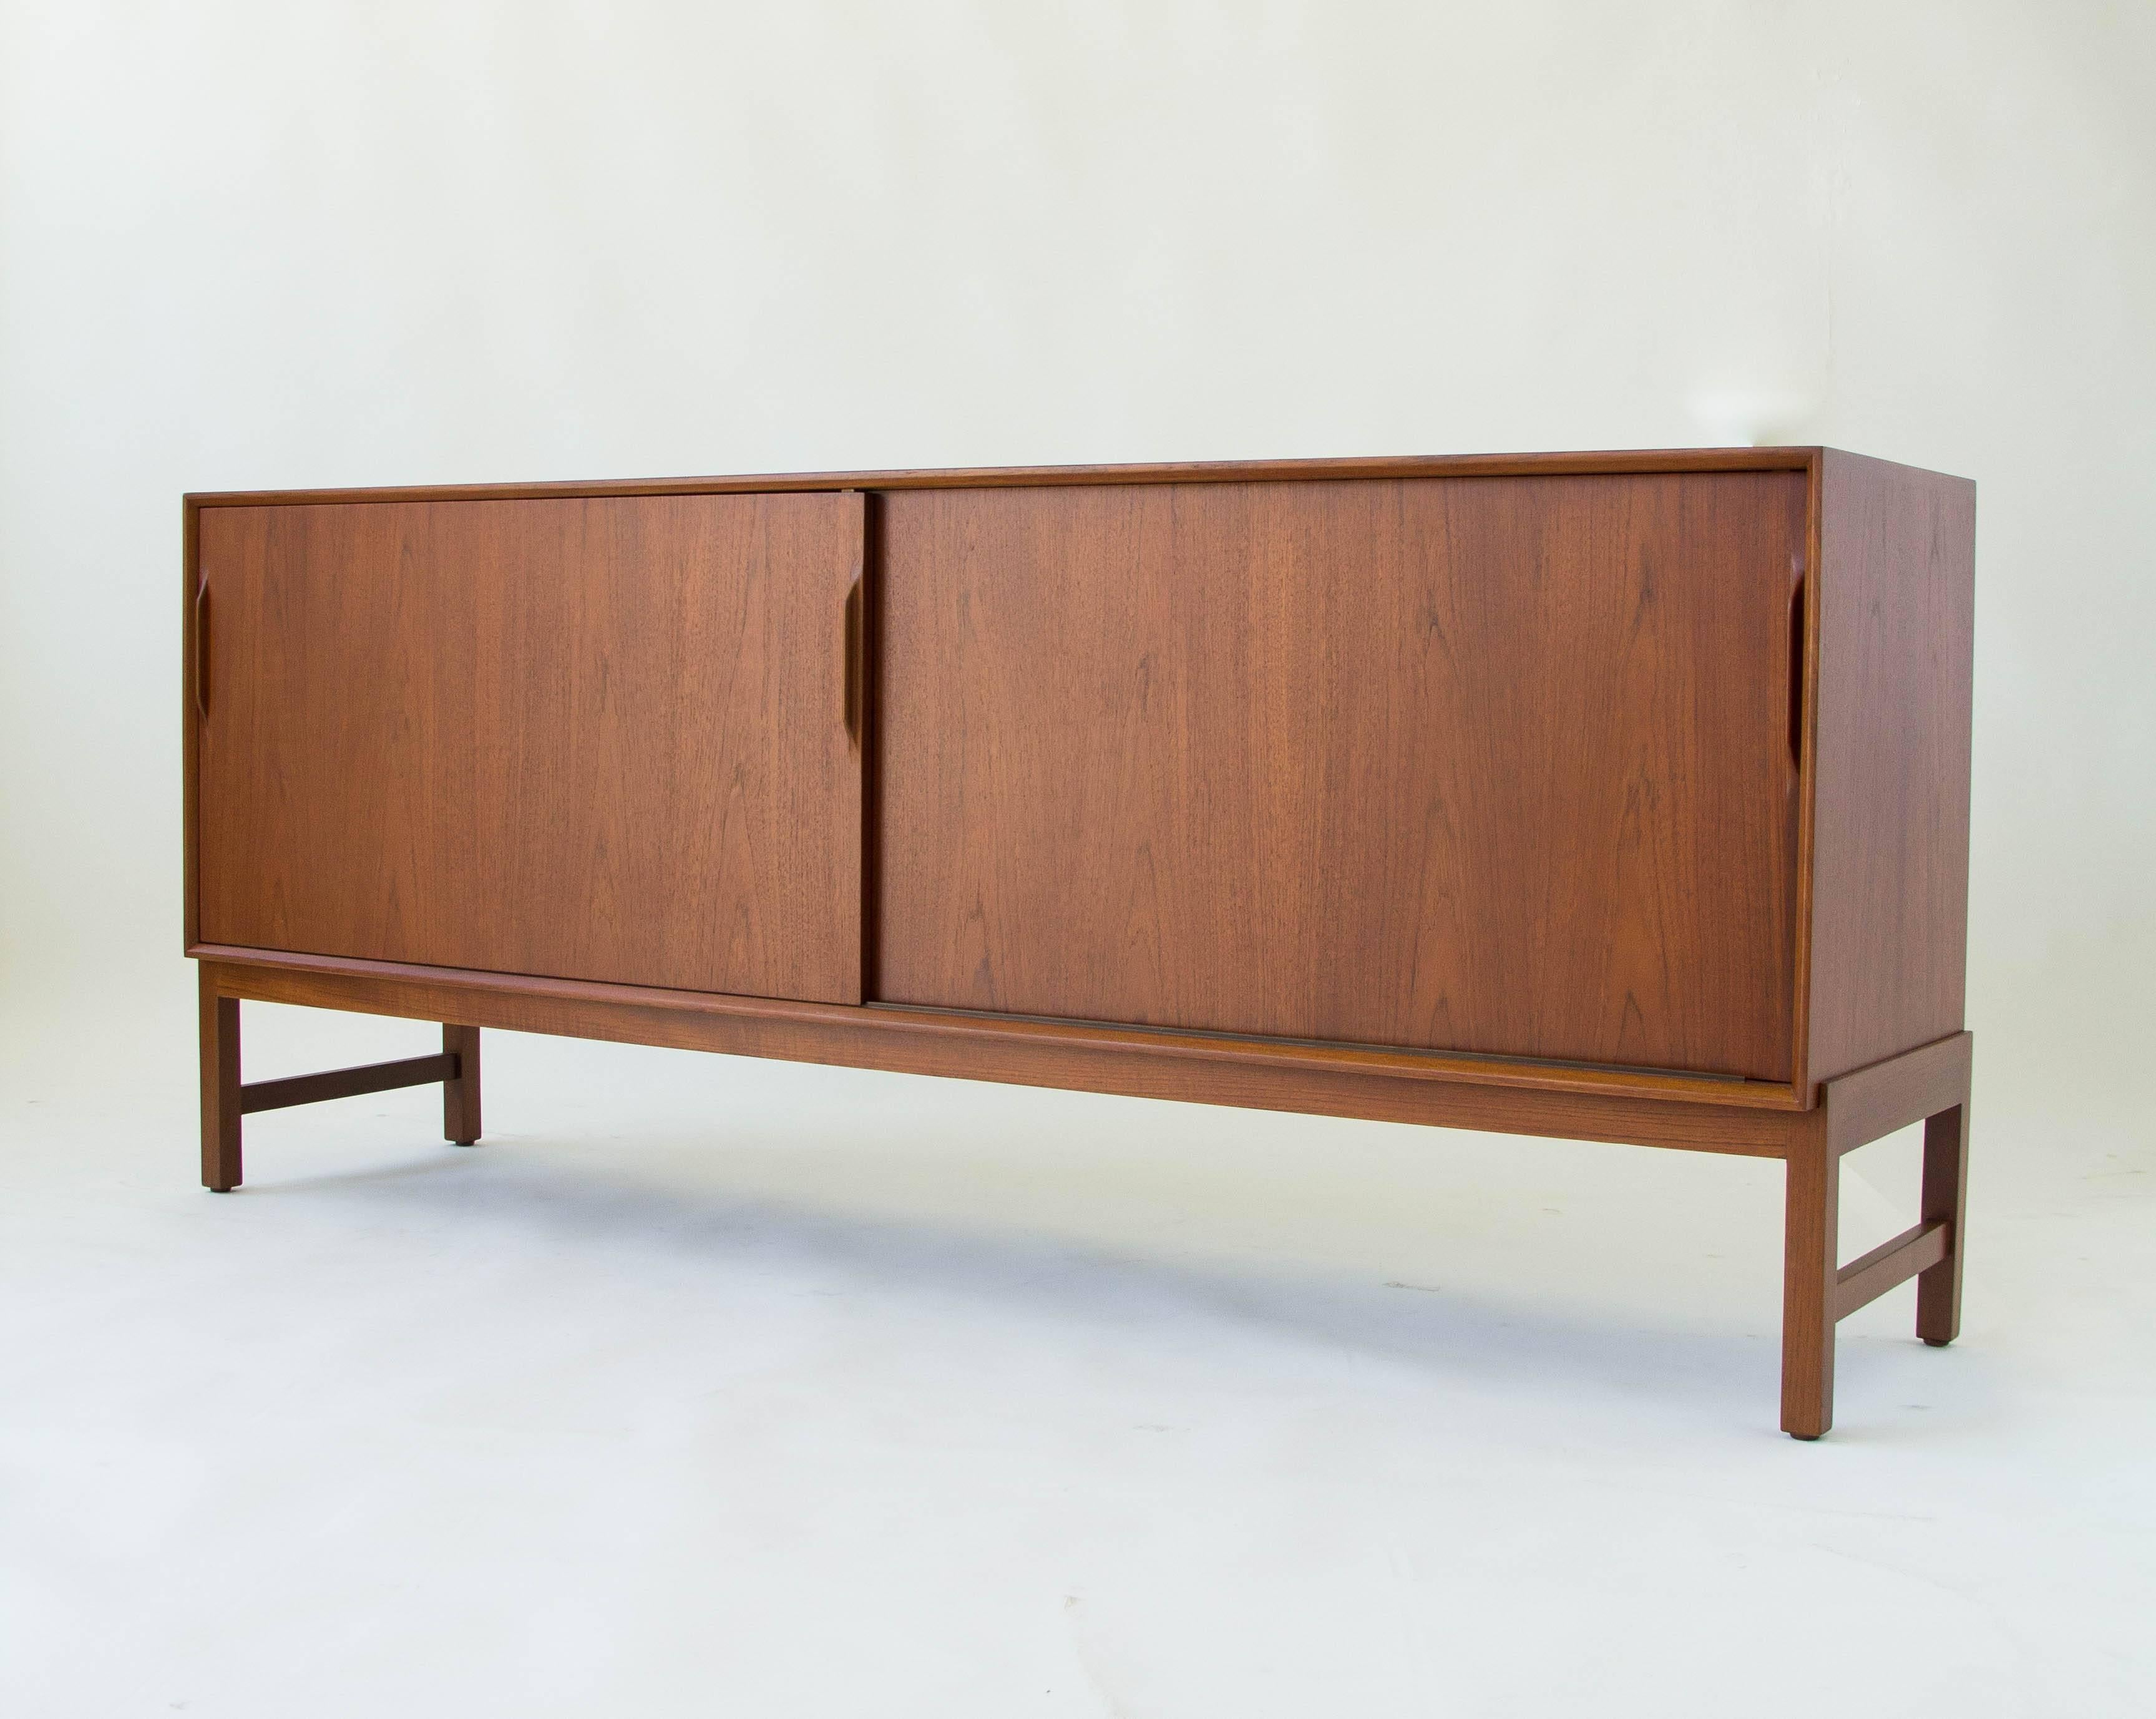 Three-compartment teak credenza by Karl-Erik Ekselius for JO Carlsson of Sweden. Solid teak legs sit flush with the case. The interior storage, accessible by two sliding doors, has modular dovetail drawers to accommodate a variety of storage